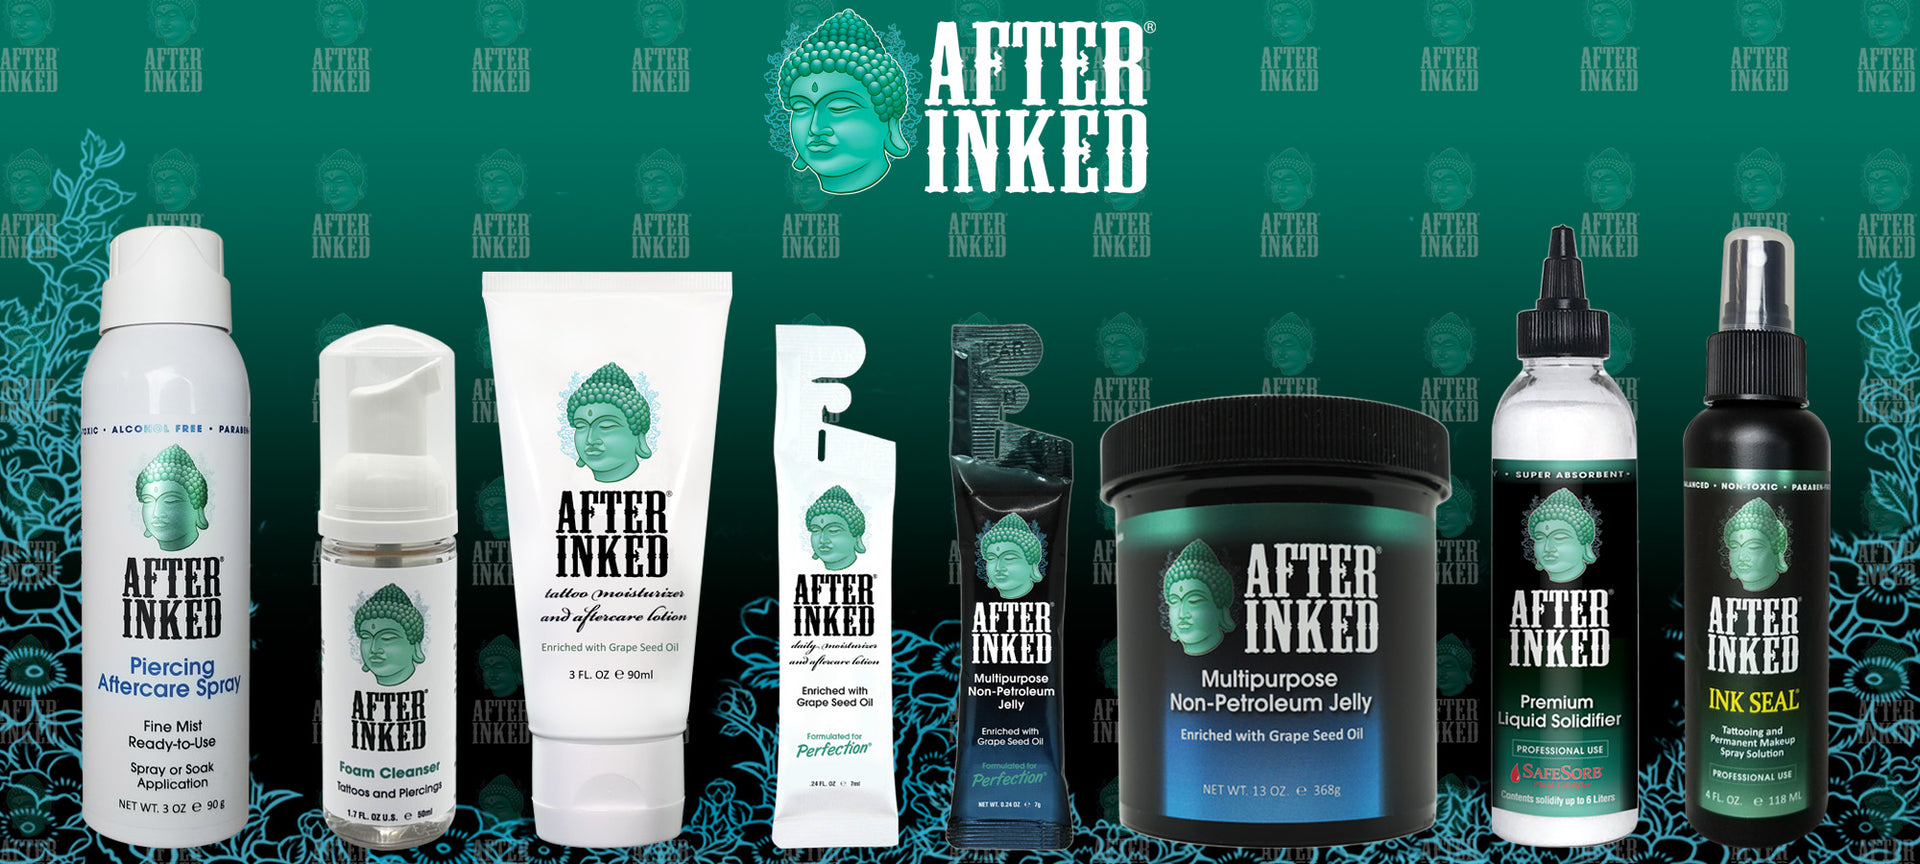 Load video: After Inked tattoo aftercare, piercing aftercare and PMU permanent make up care. Tattoo moisturizer, foam cleanser soap, piercing spray. Premium skin care products for tattoos, piercing and permanent make up.